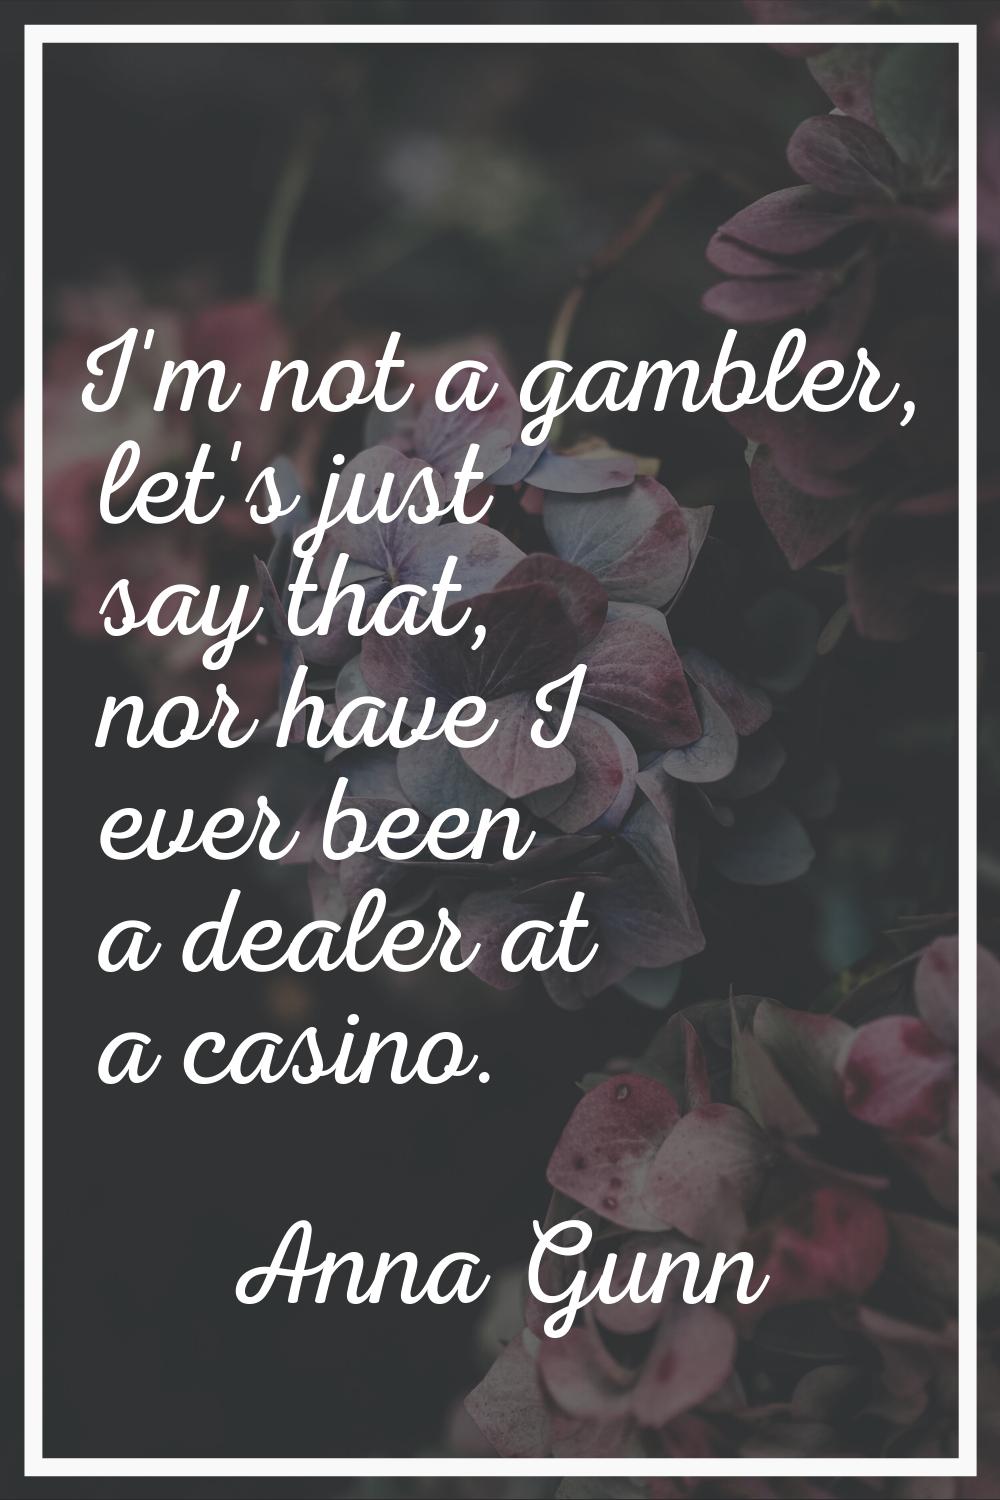 I'm not a gambler, let's just say that, nor have I ever been a dealer at a casino.